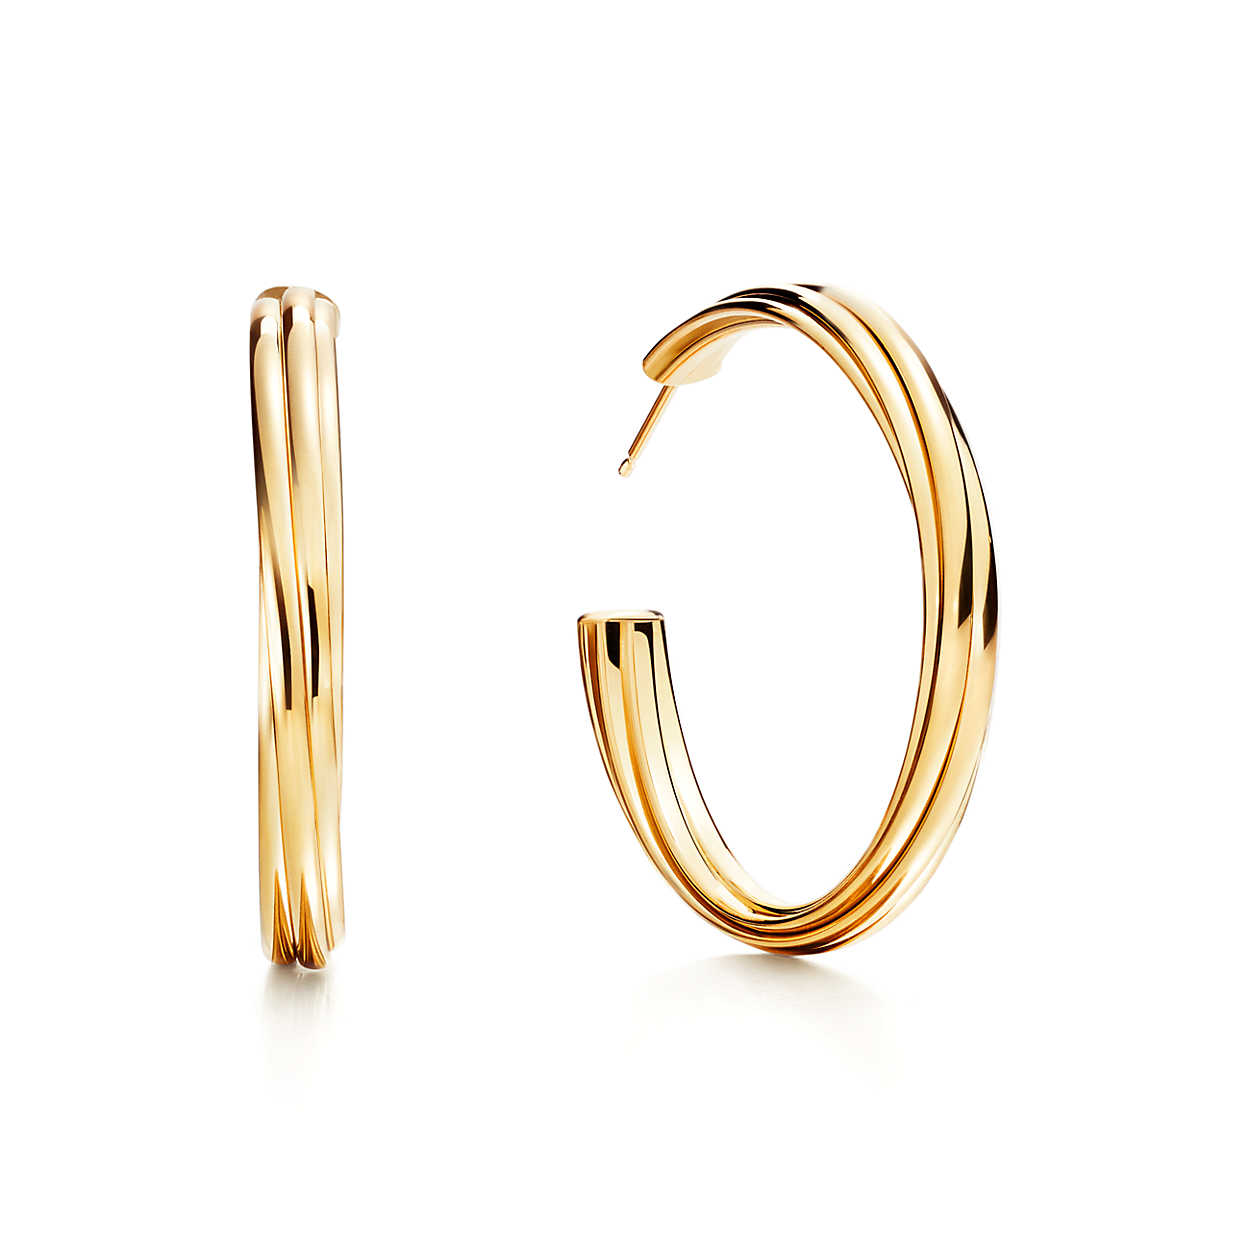 The Gold Statement Earrings We're All Wearing Right Now | Who What Wear